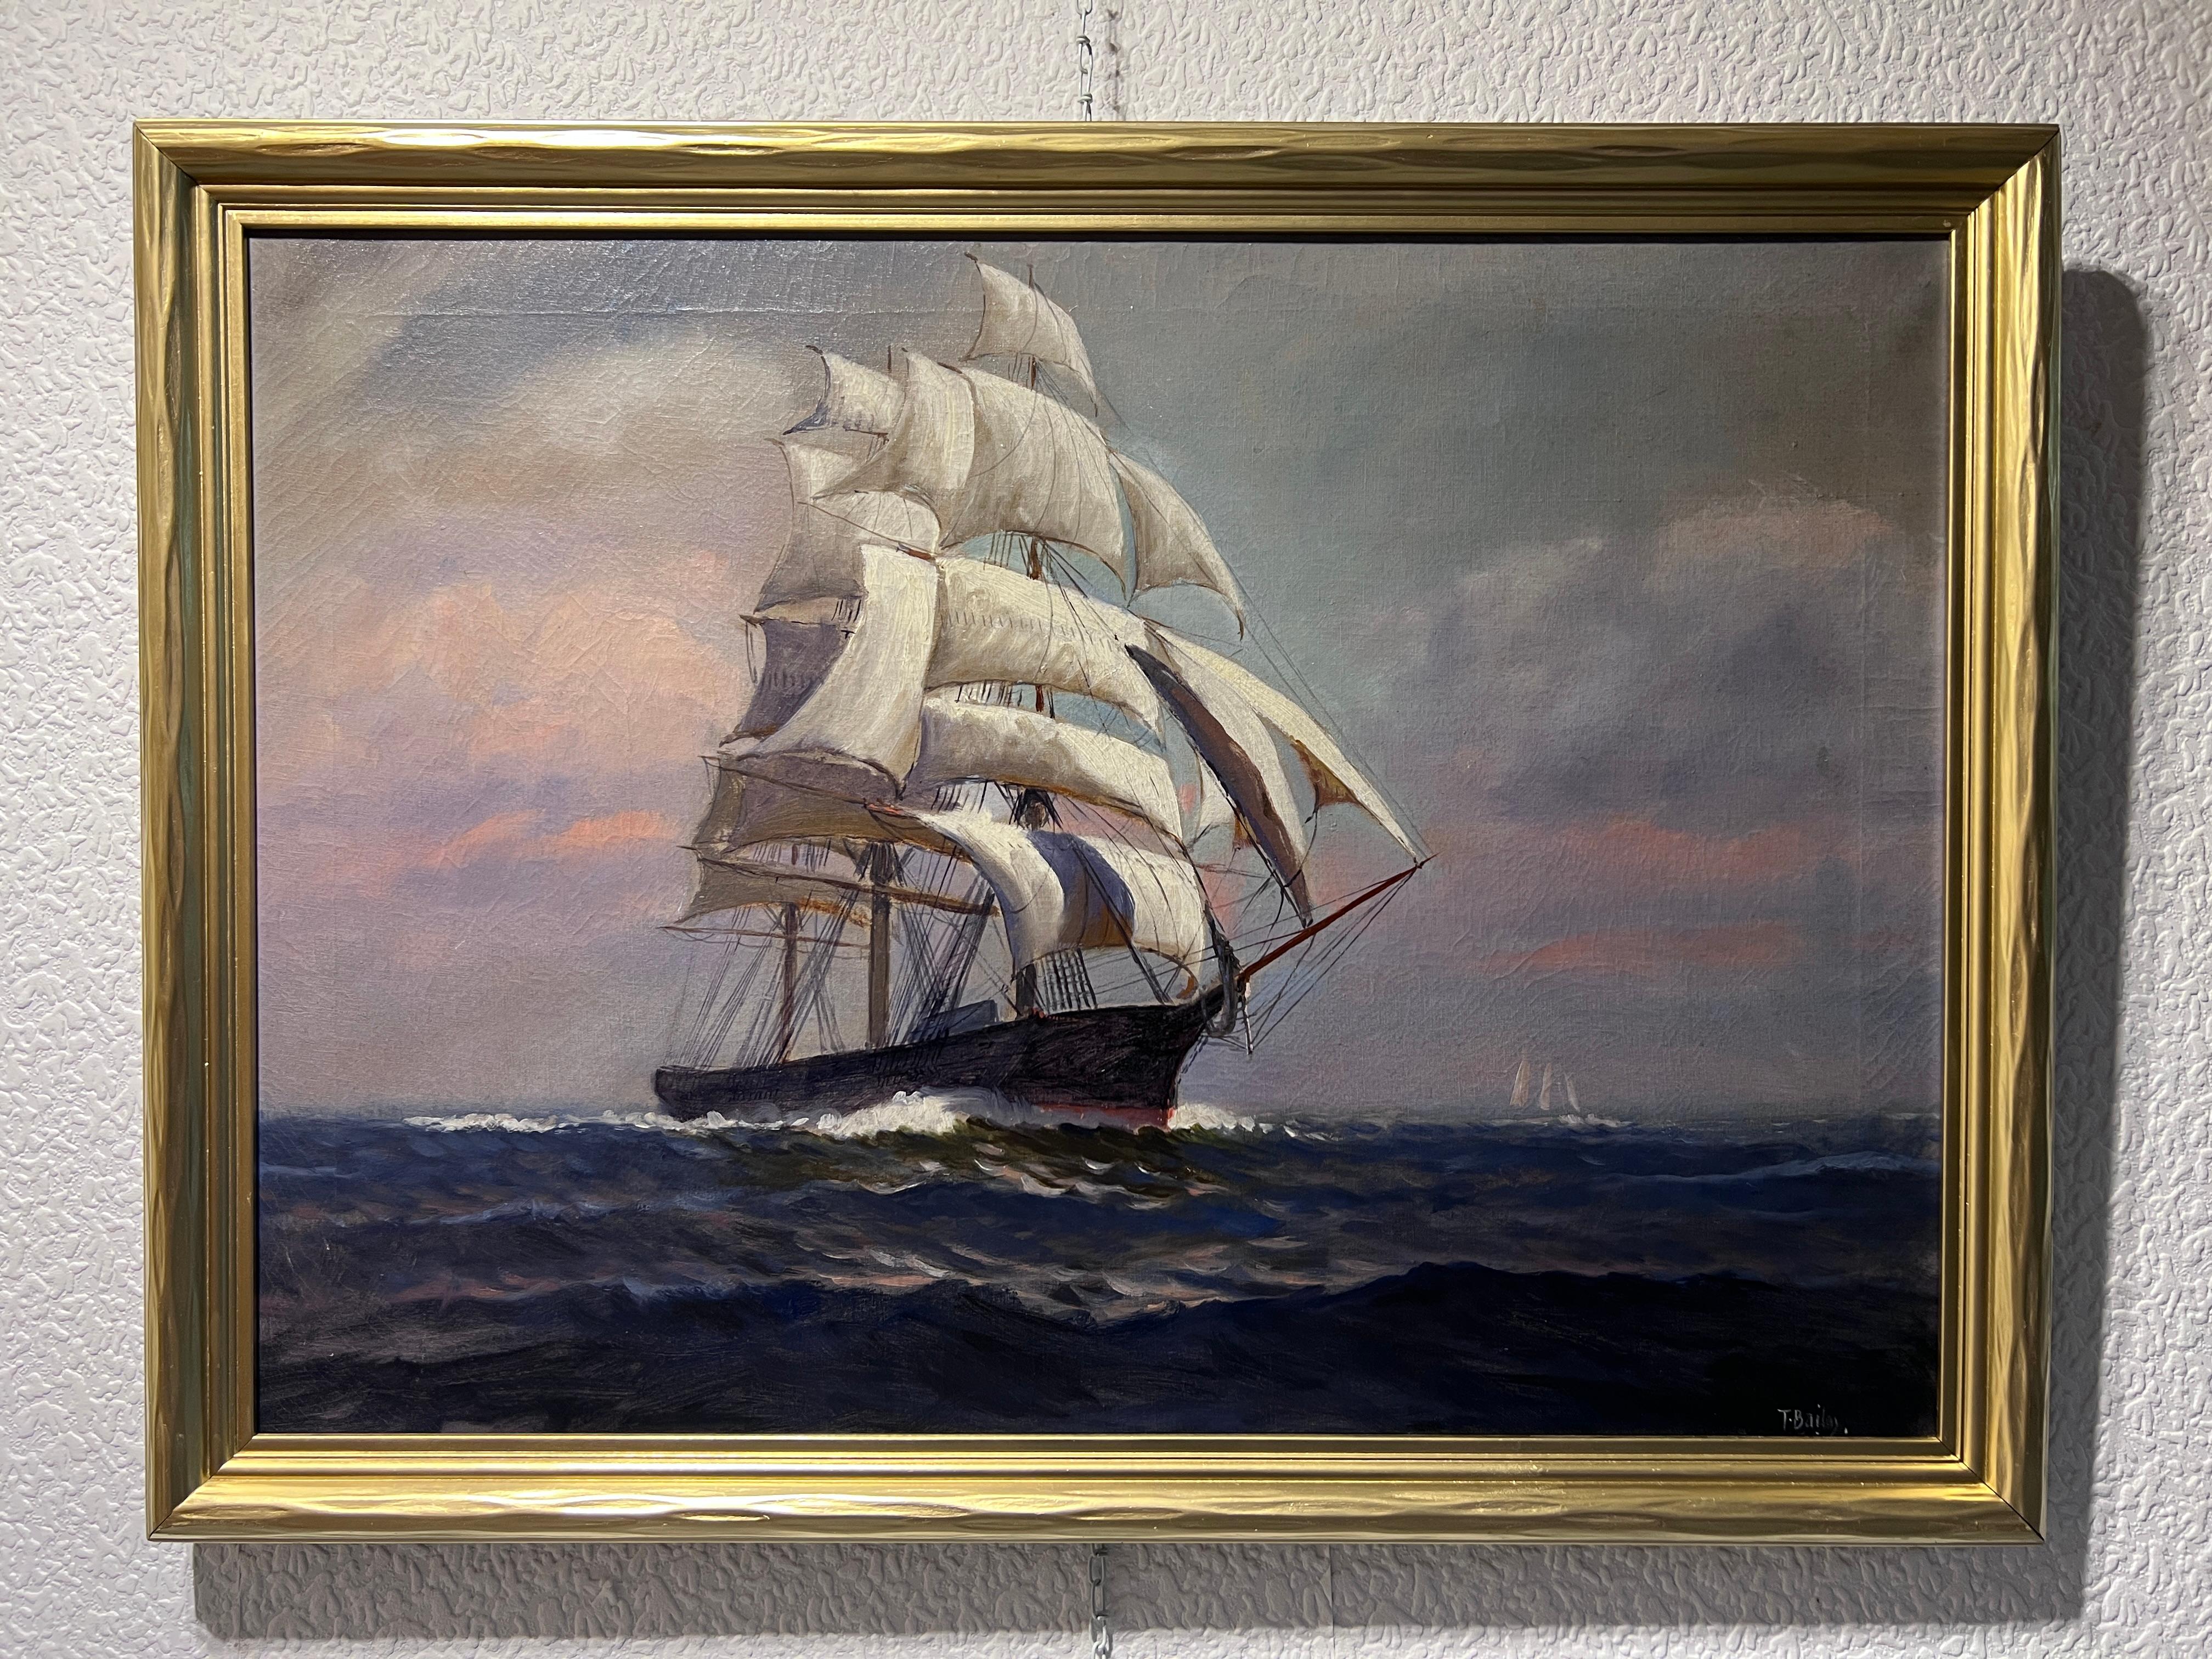 Up for sale gorgeous original Nautical oil painting on canvas, signed by the mysterious Artist 